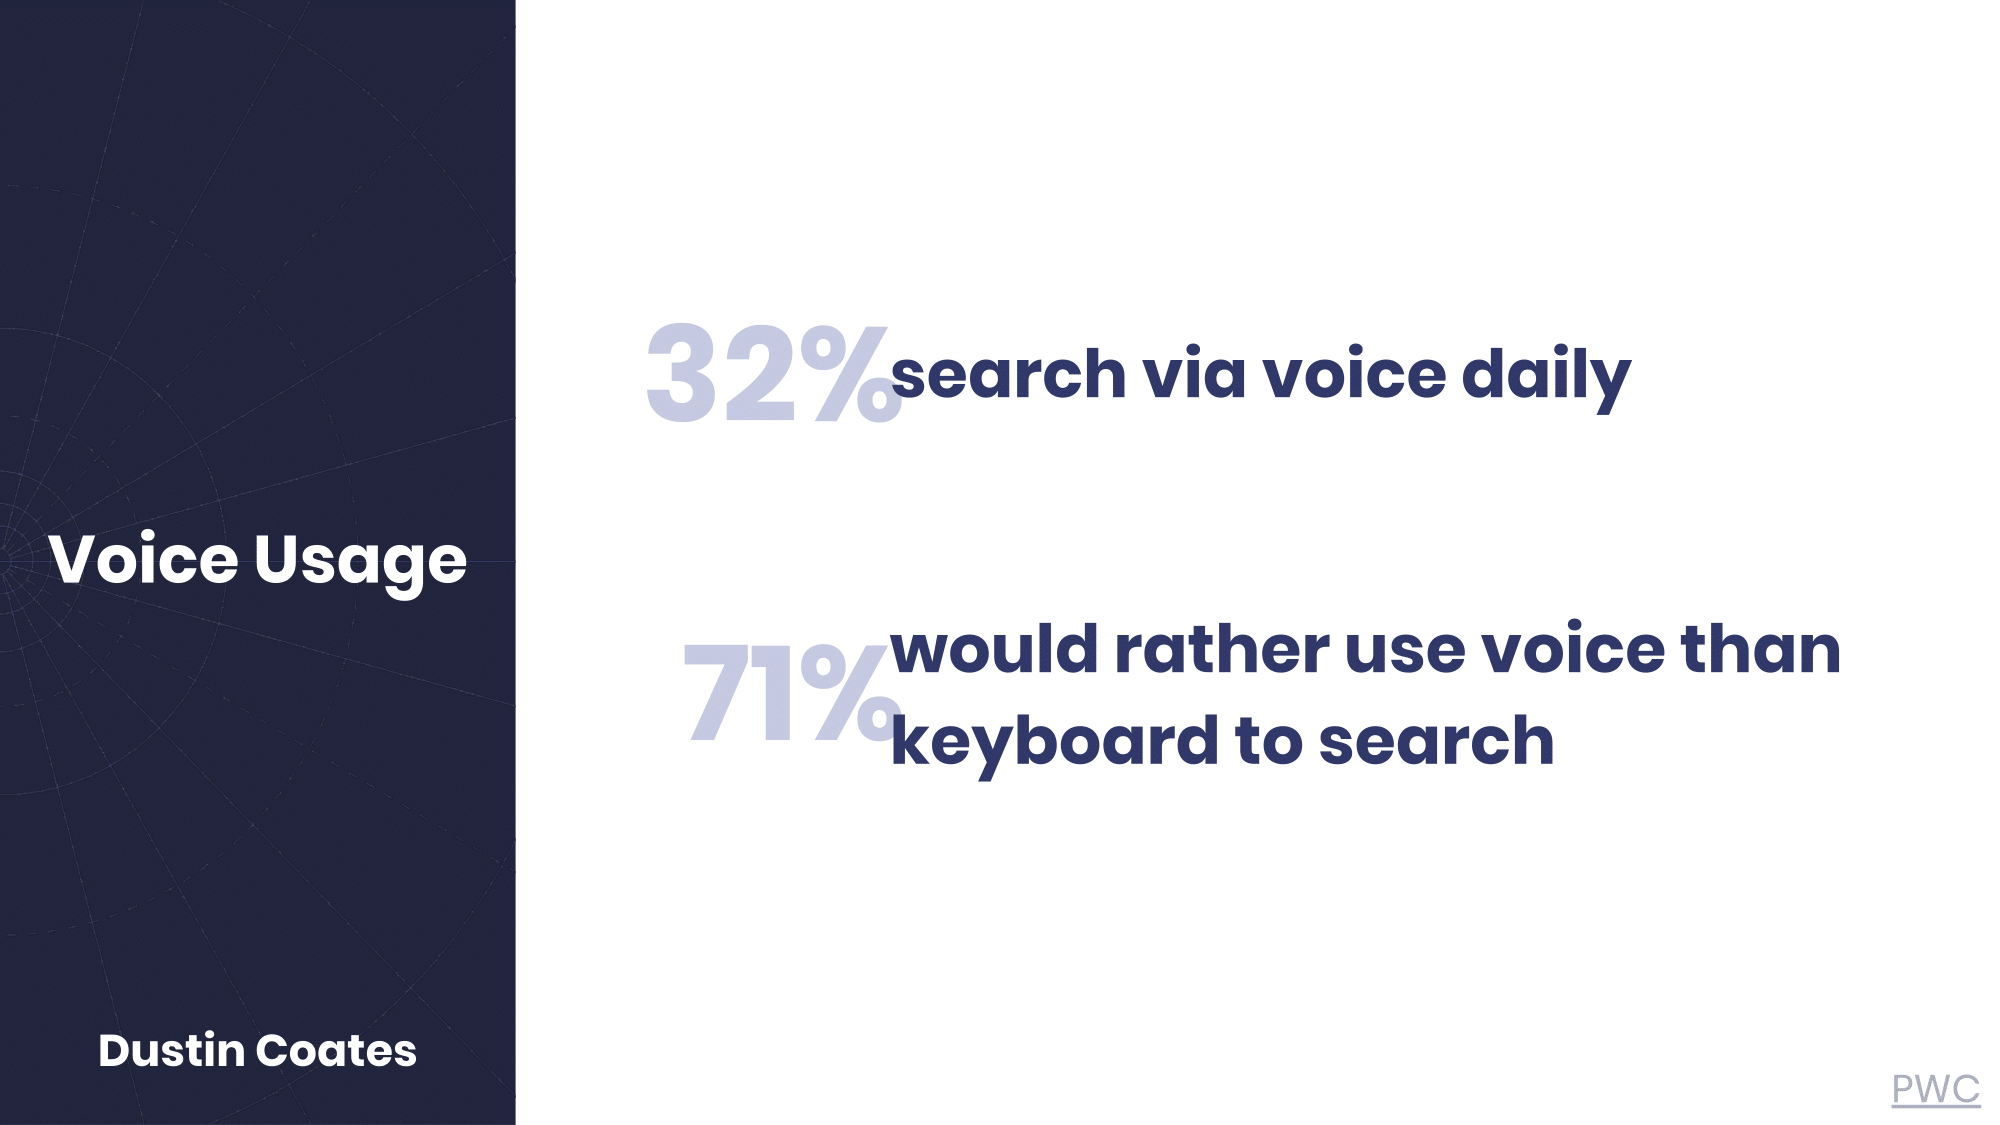 Voice search usage